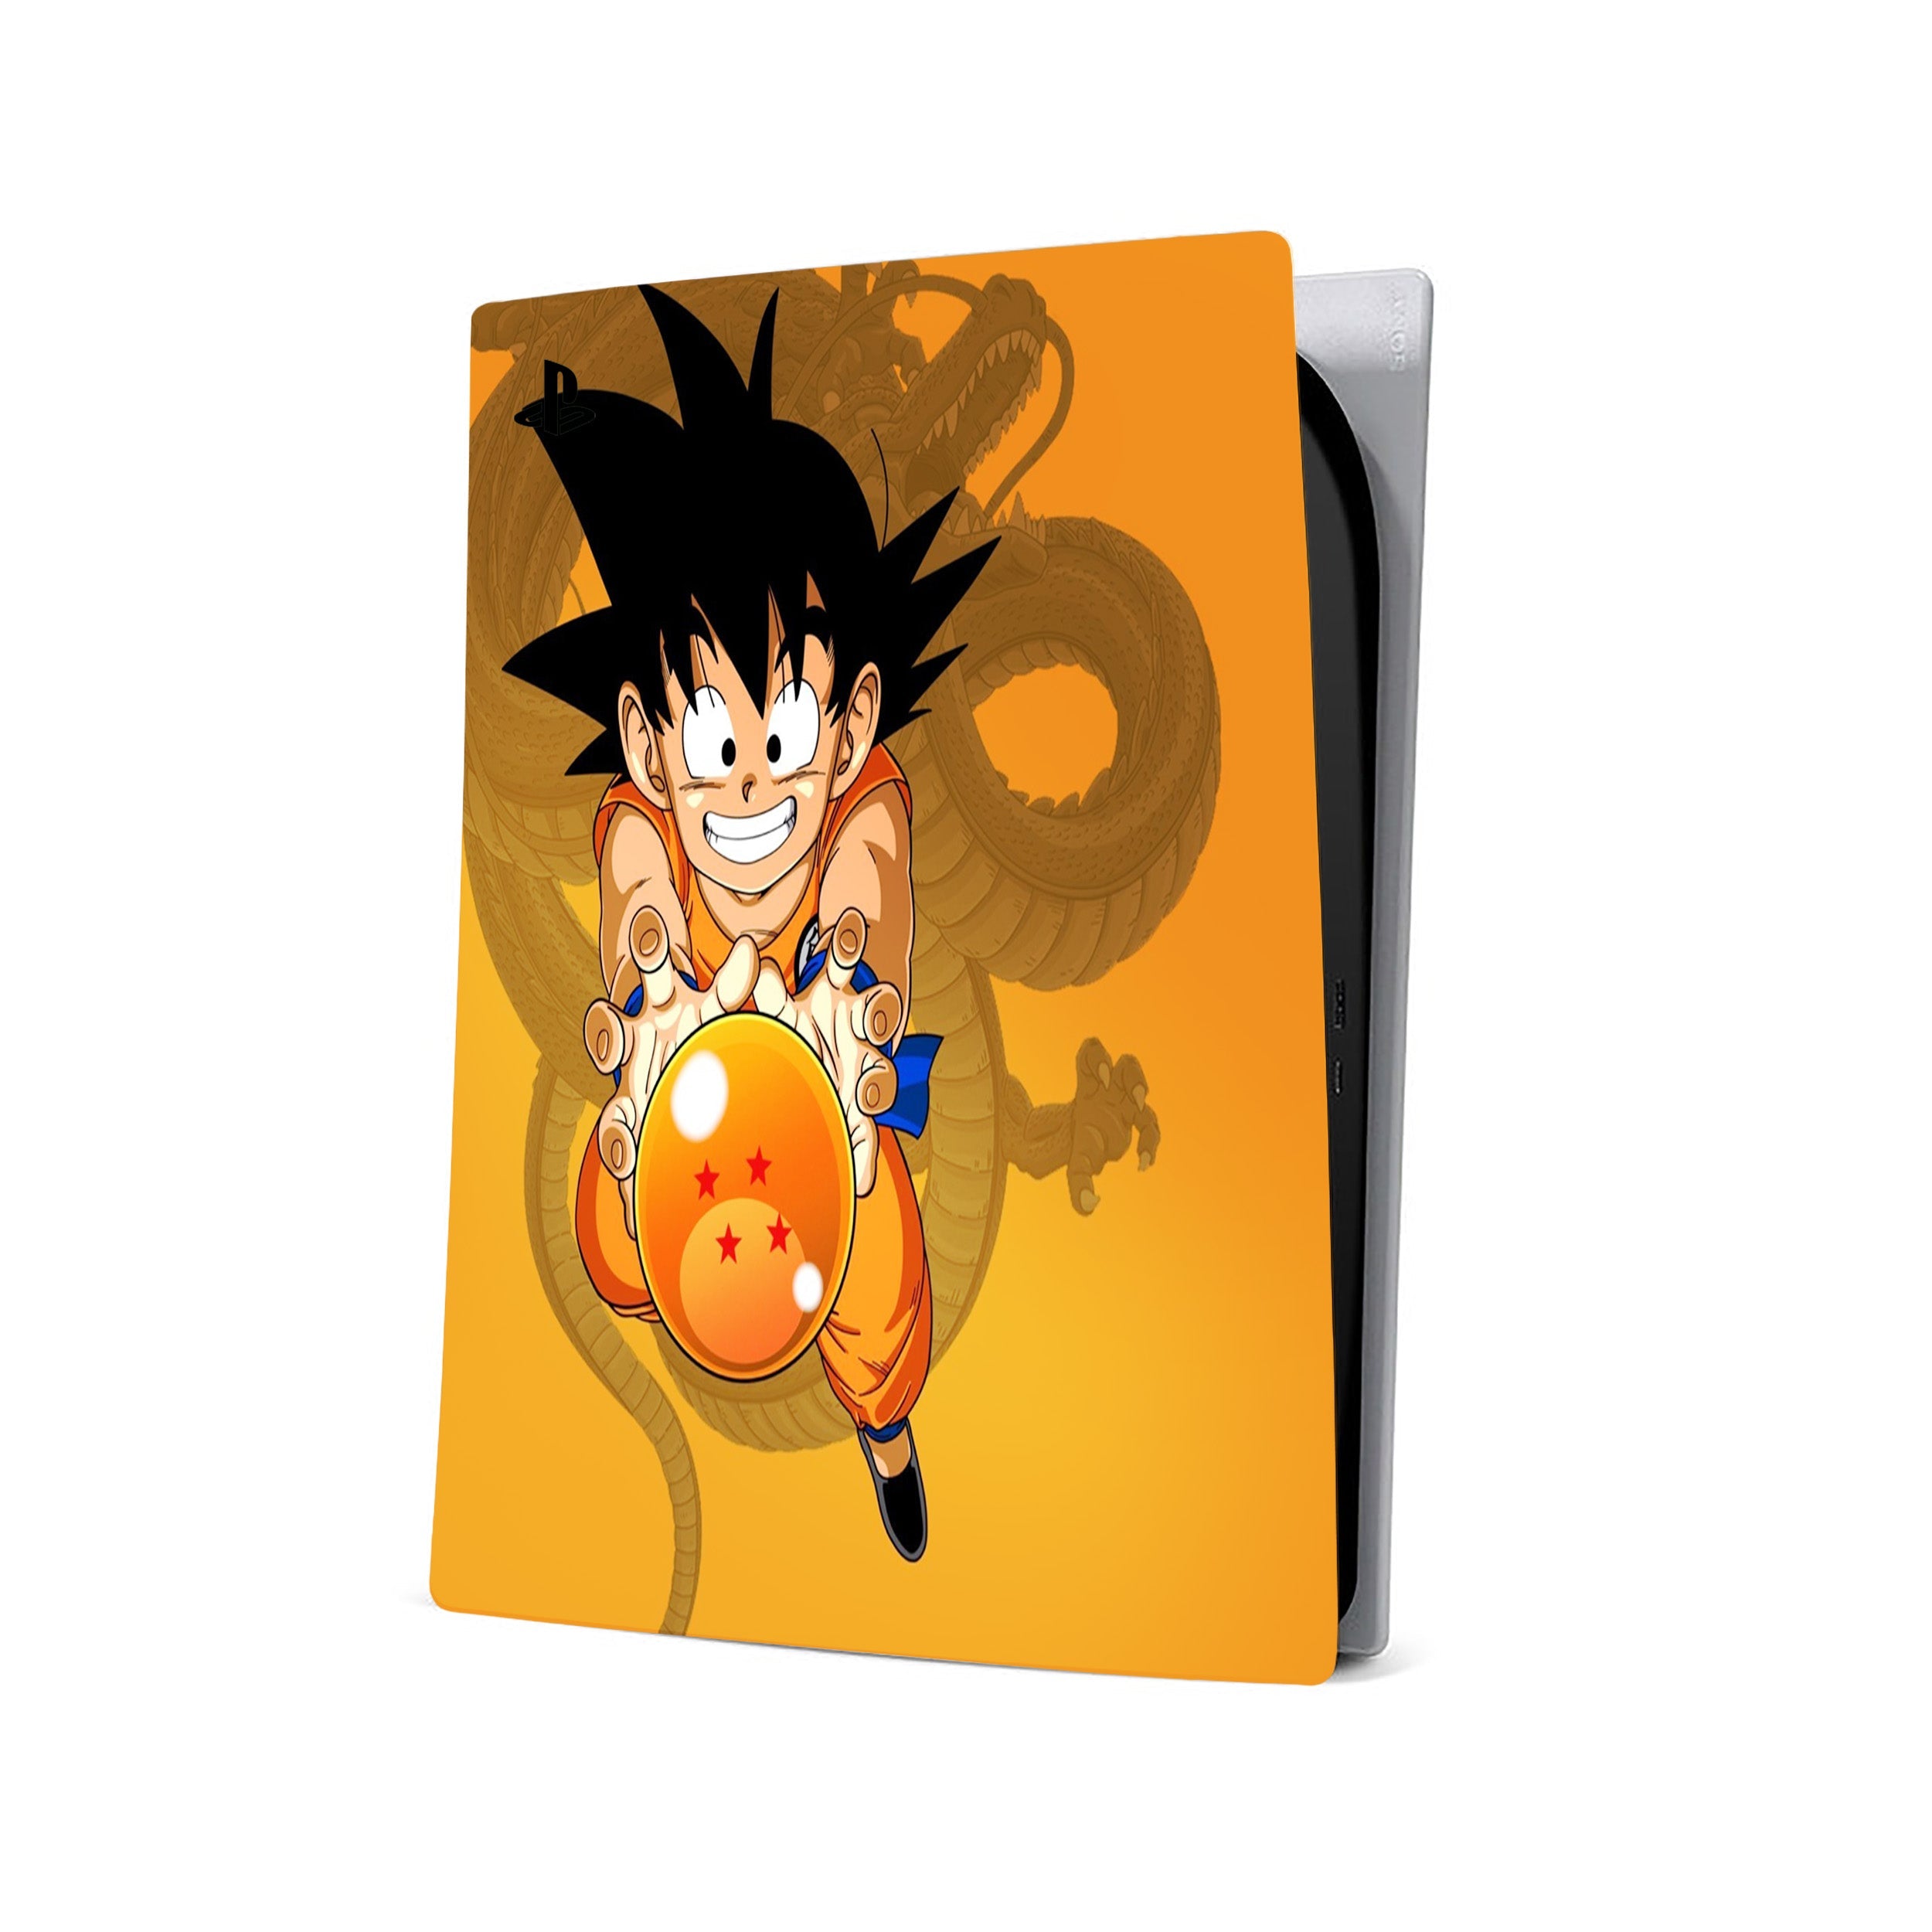 A video game skin featuring a Dragon Ball Z Goku design for the PS5.